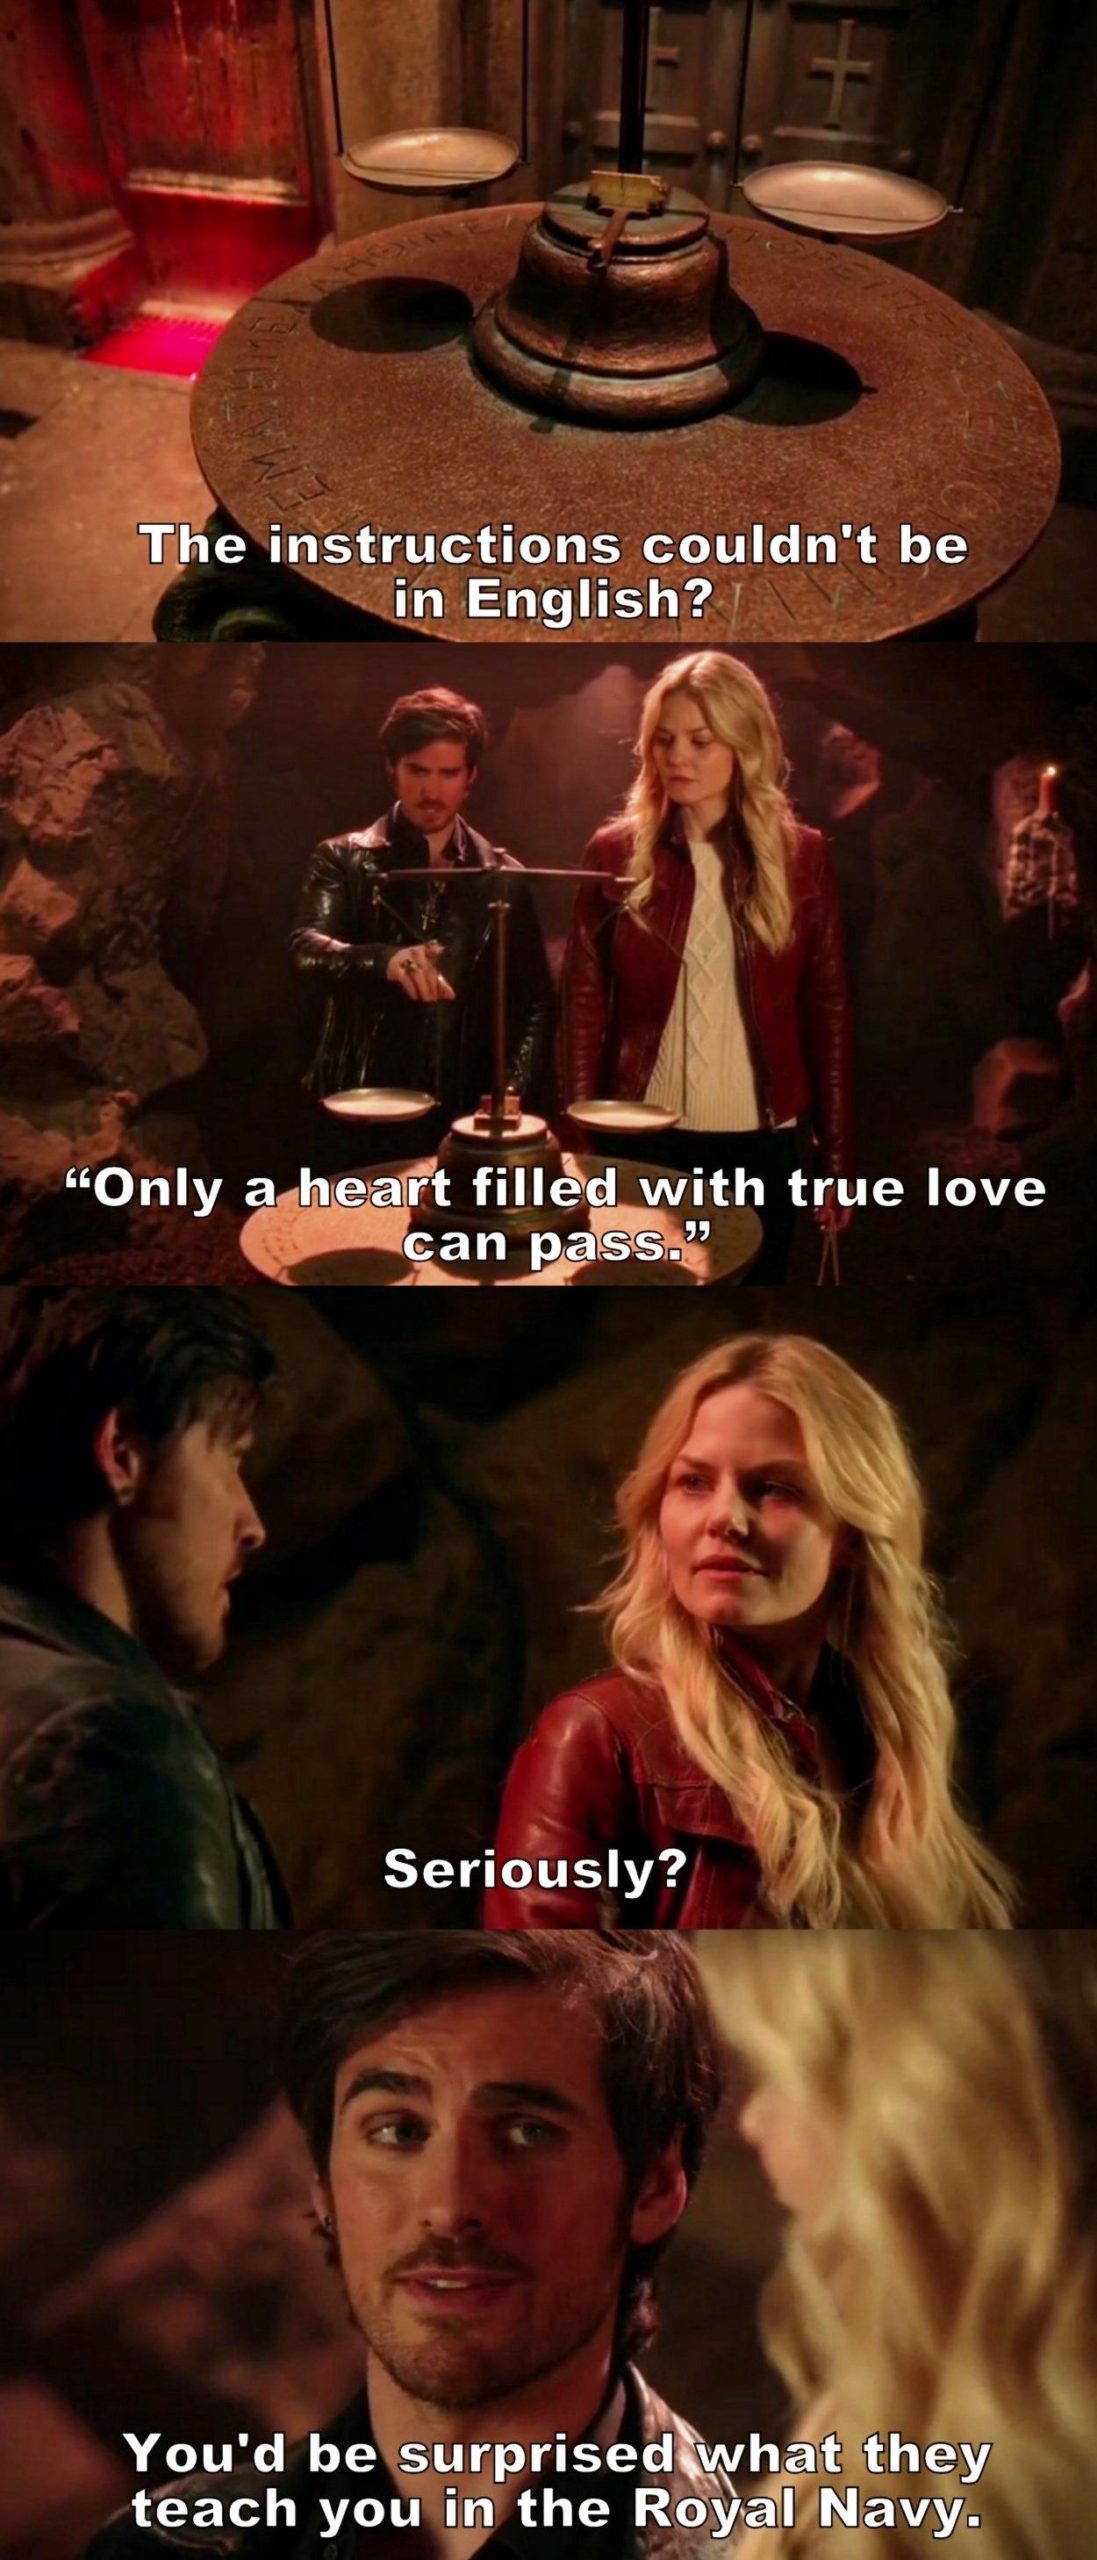 List : 80+ Best "Once Upon a Time" TV Show Quotes (Photos Collection)